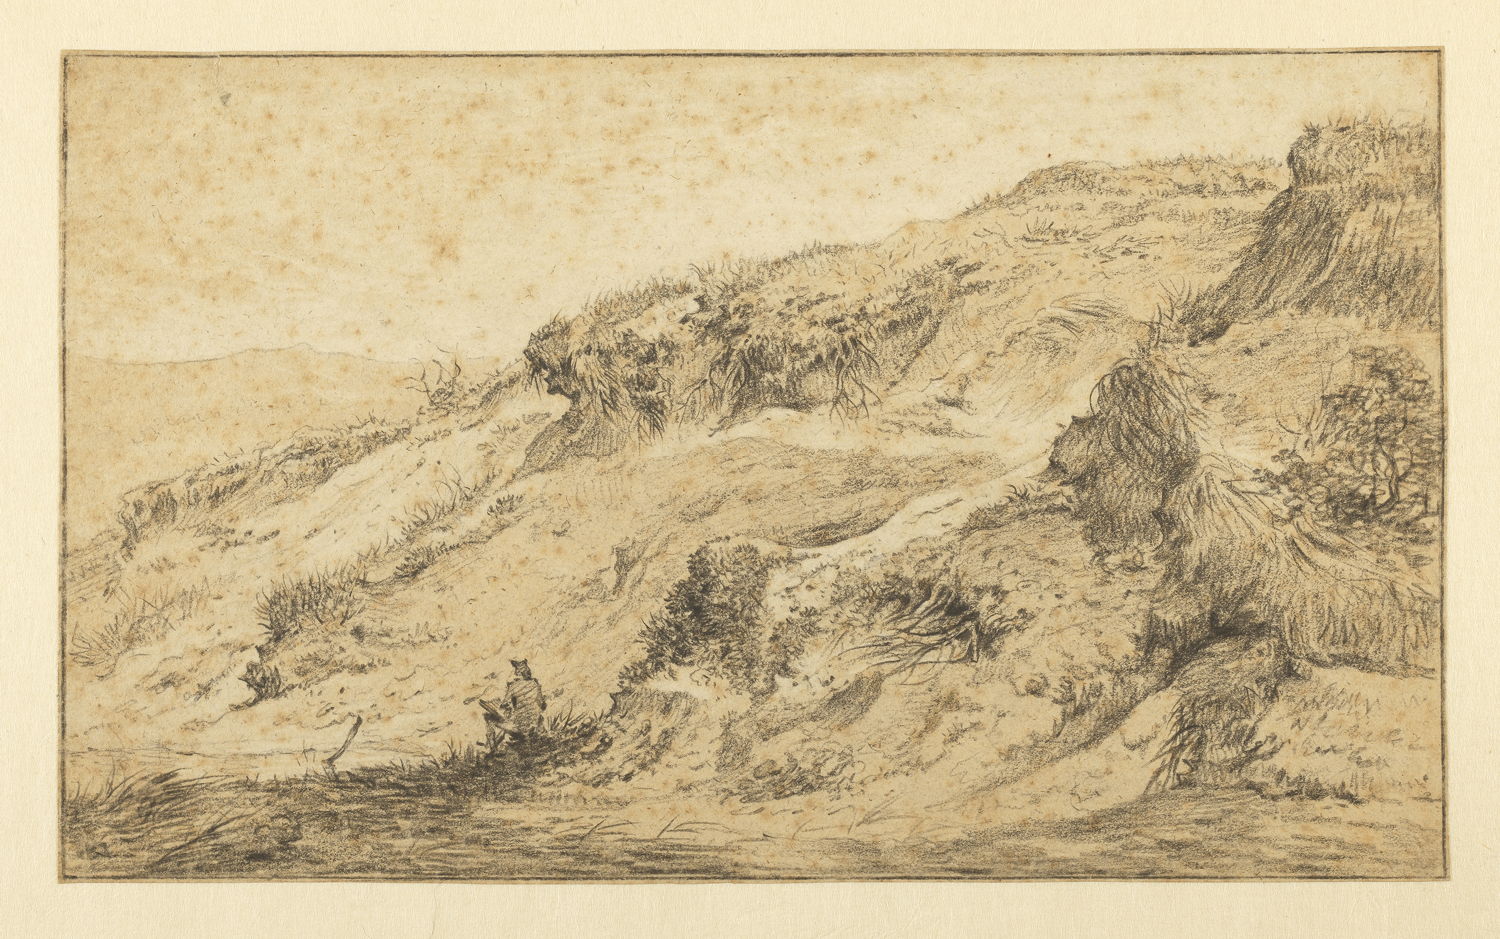 Hermanus Fock (Amsterdam 1766 - Franeker 1822)  D Dune Landscape with a Man Sketching Black chalk, heightened with white chalk, on light brown paper. On long-term loan from Stichting Jean van Caloen 